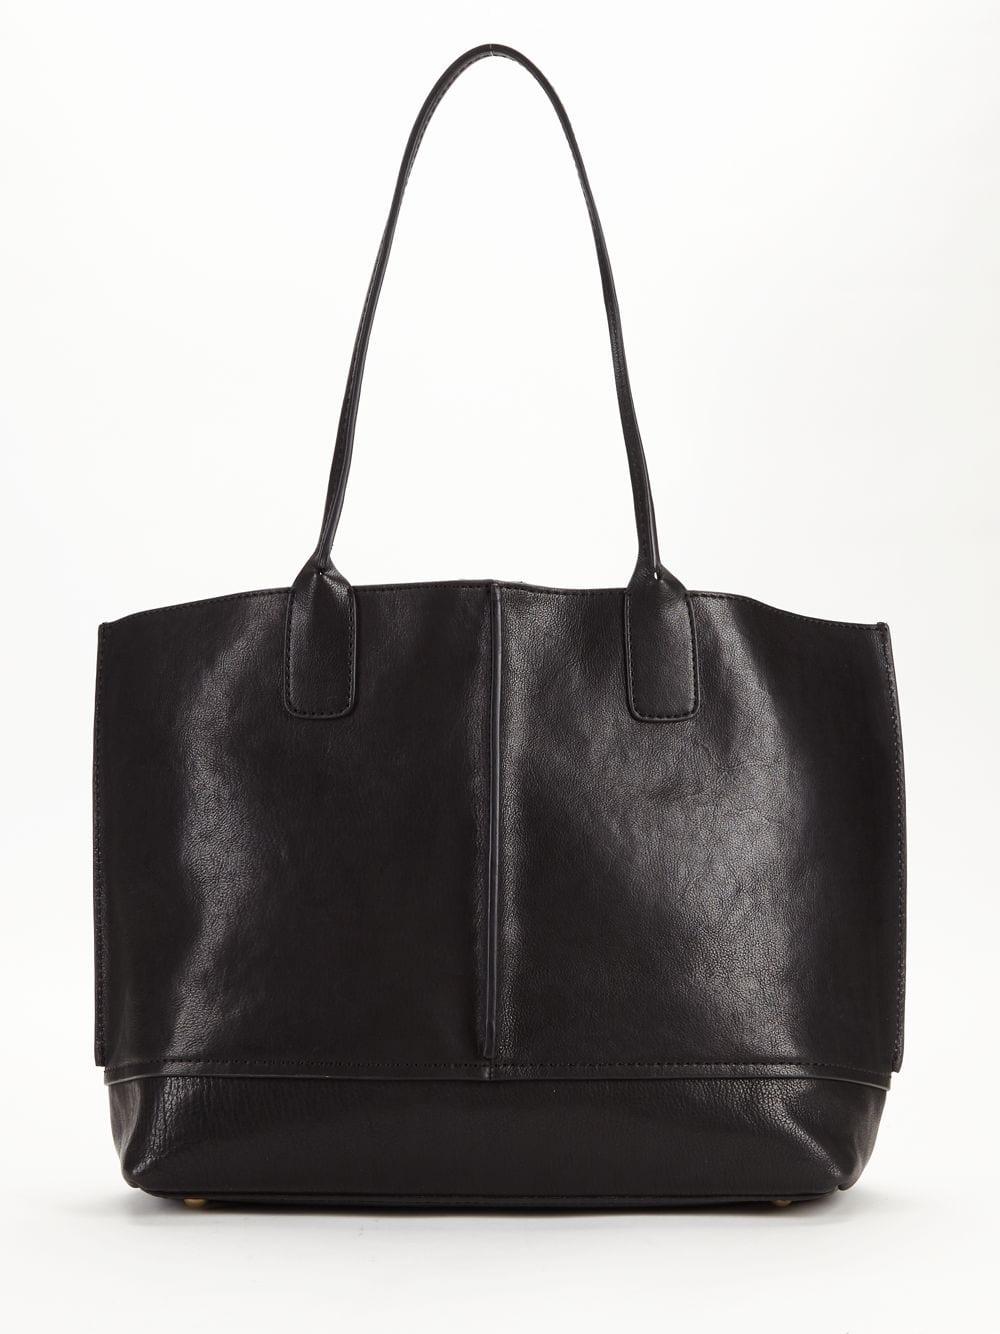 Frye Lucy Leather Tote in Black - Lyst